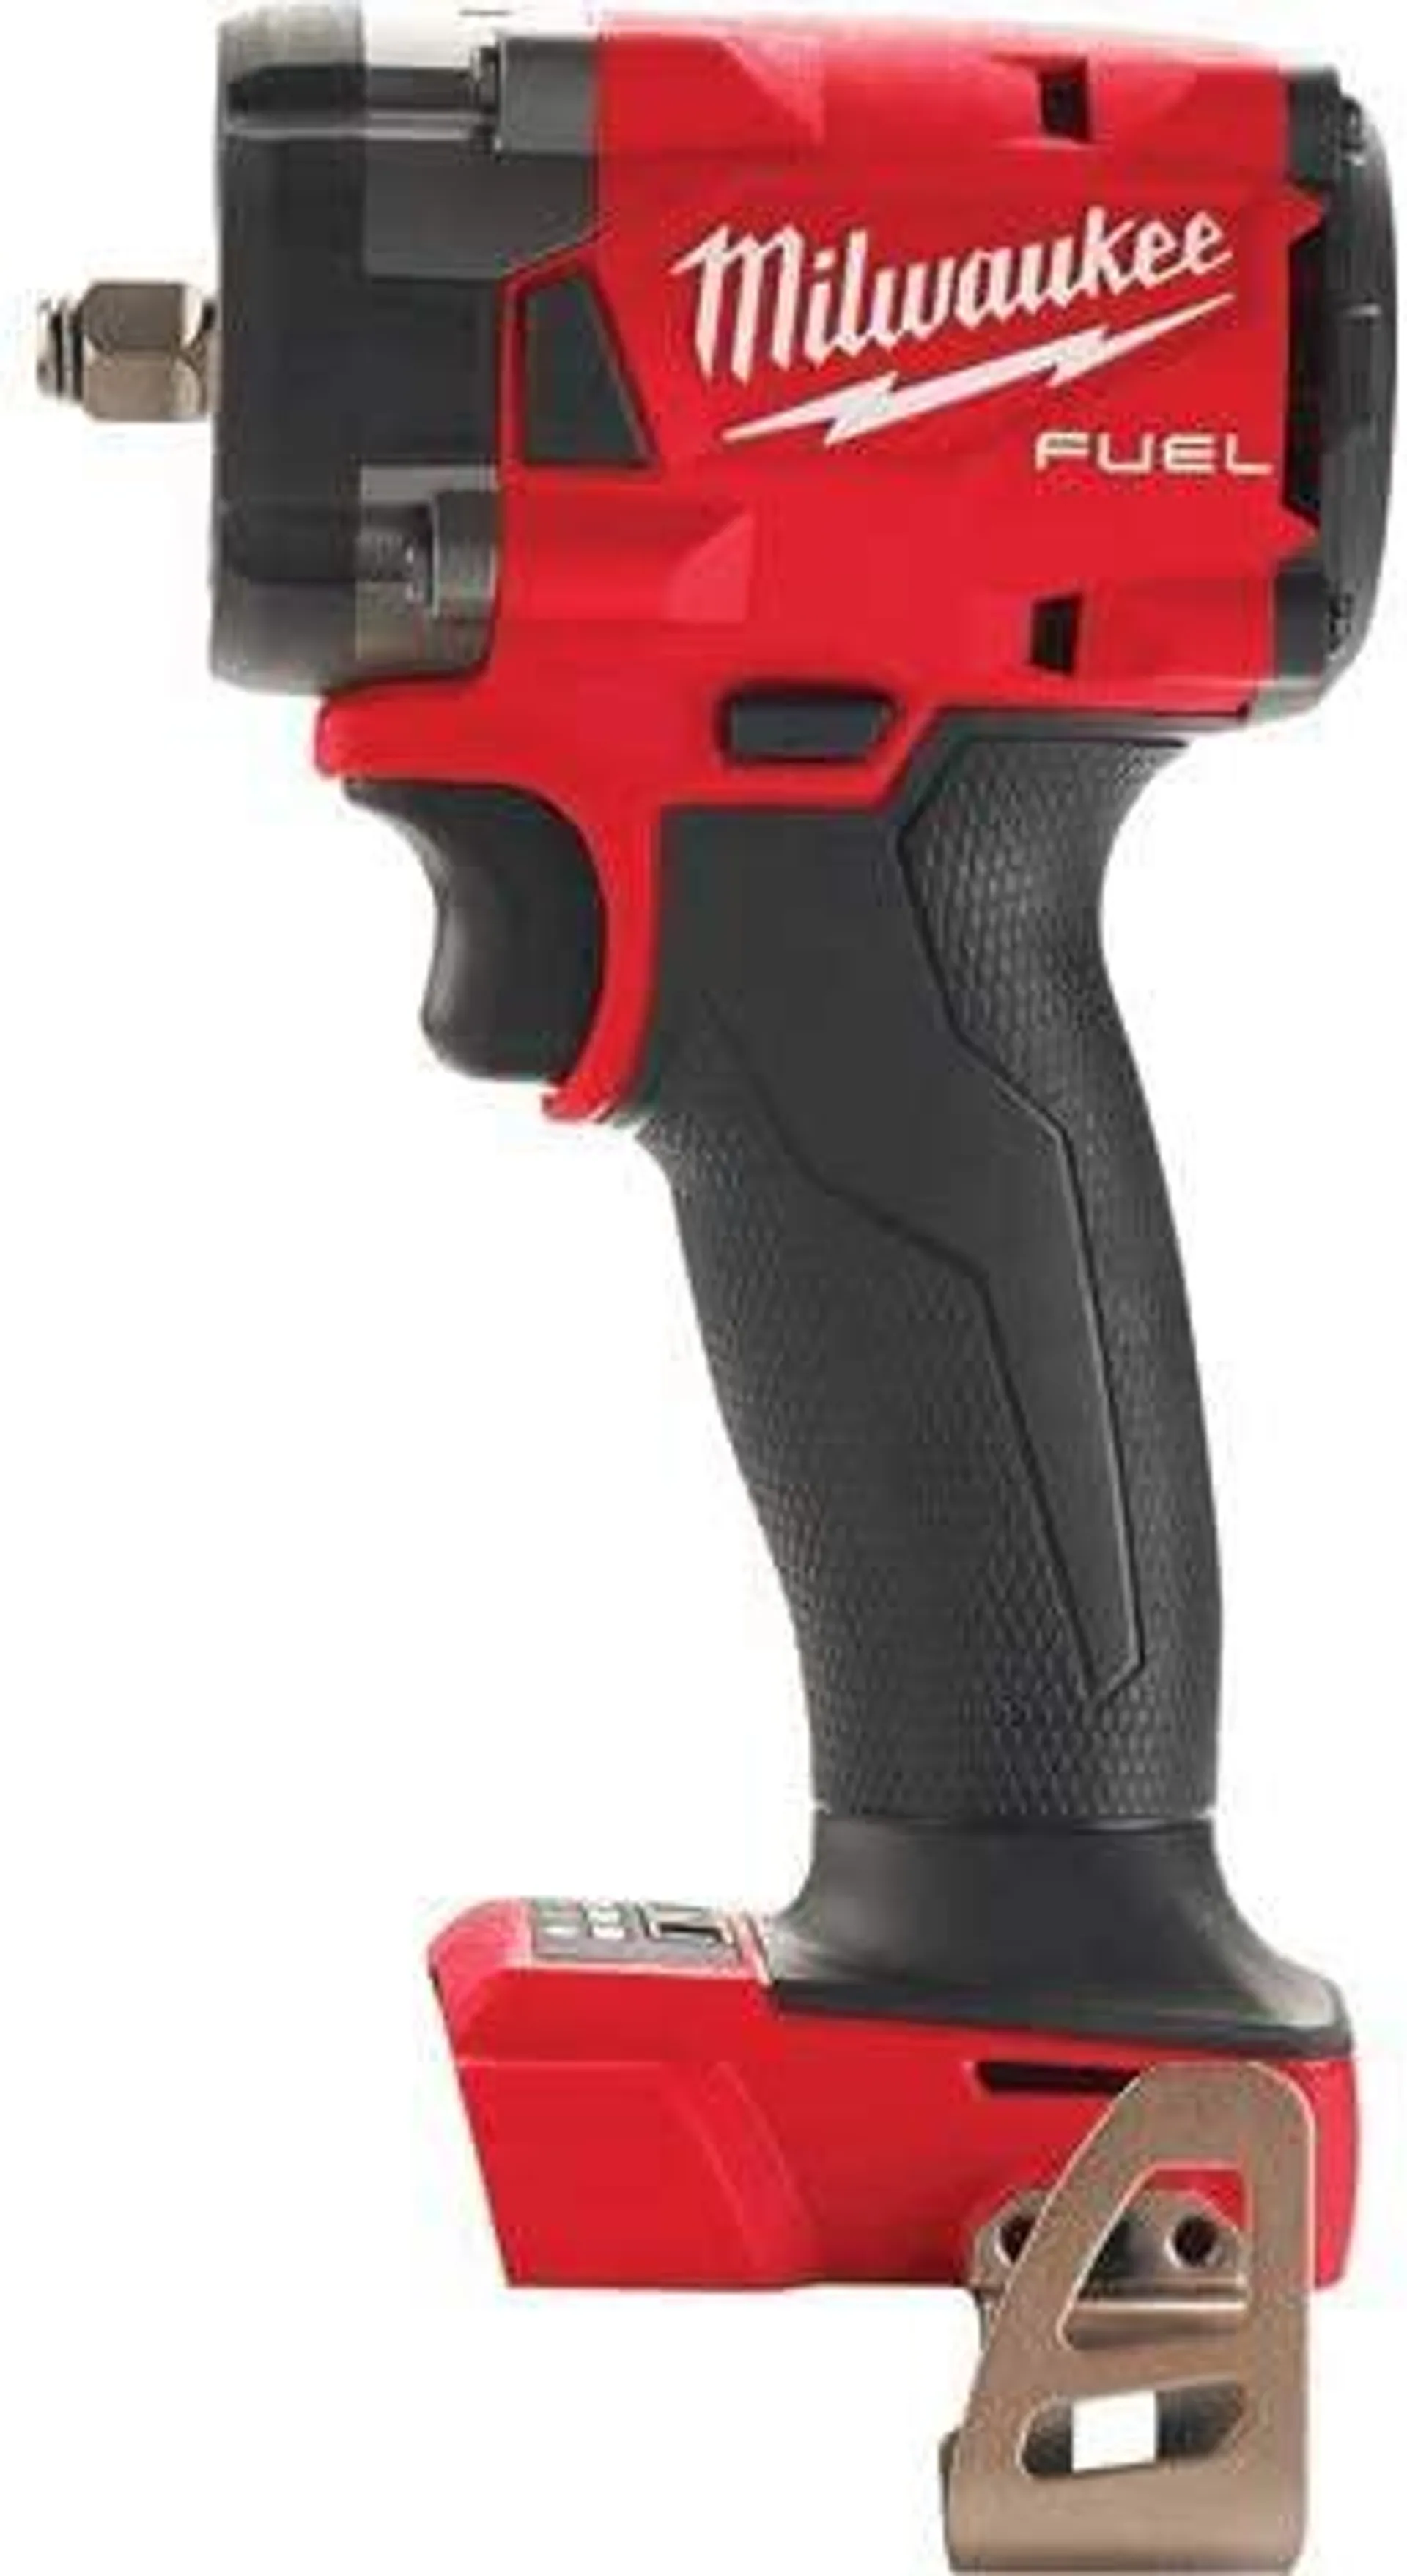 Milwaukee M18 FUEL 3/8" Compact Impact Wrench with Friction Ring - No Charger, No Battery, Bare Tool Only